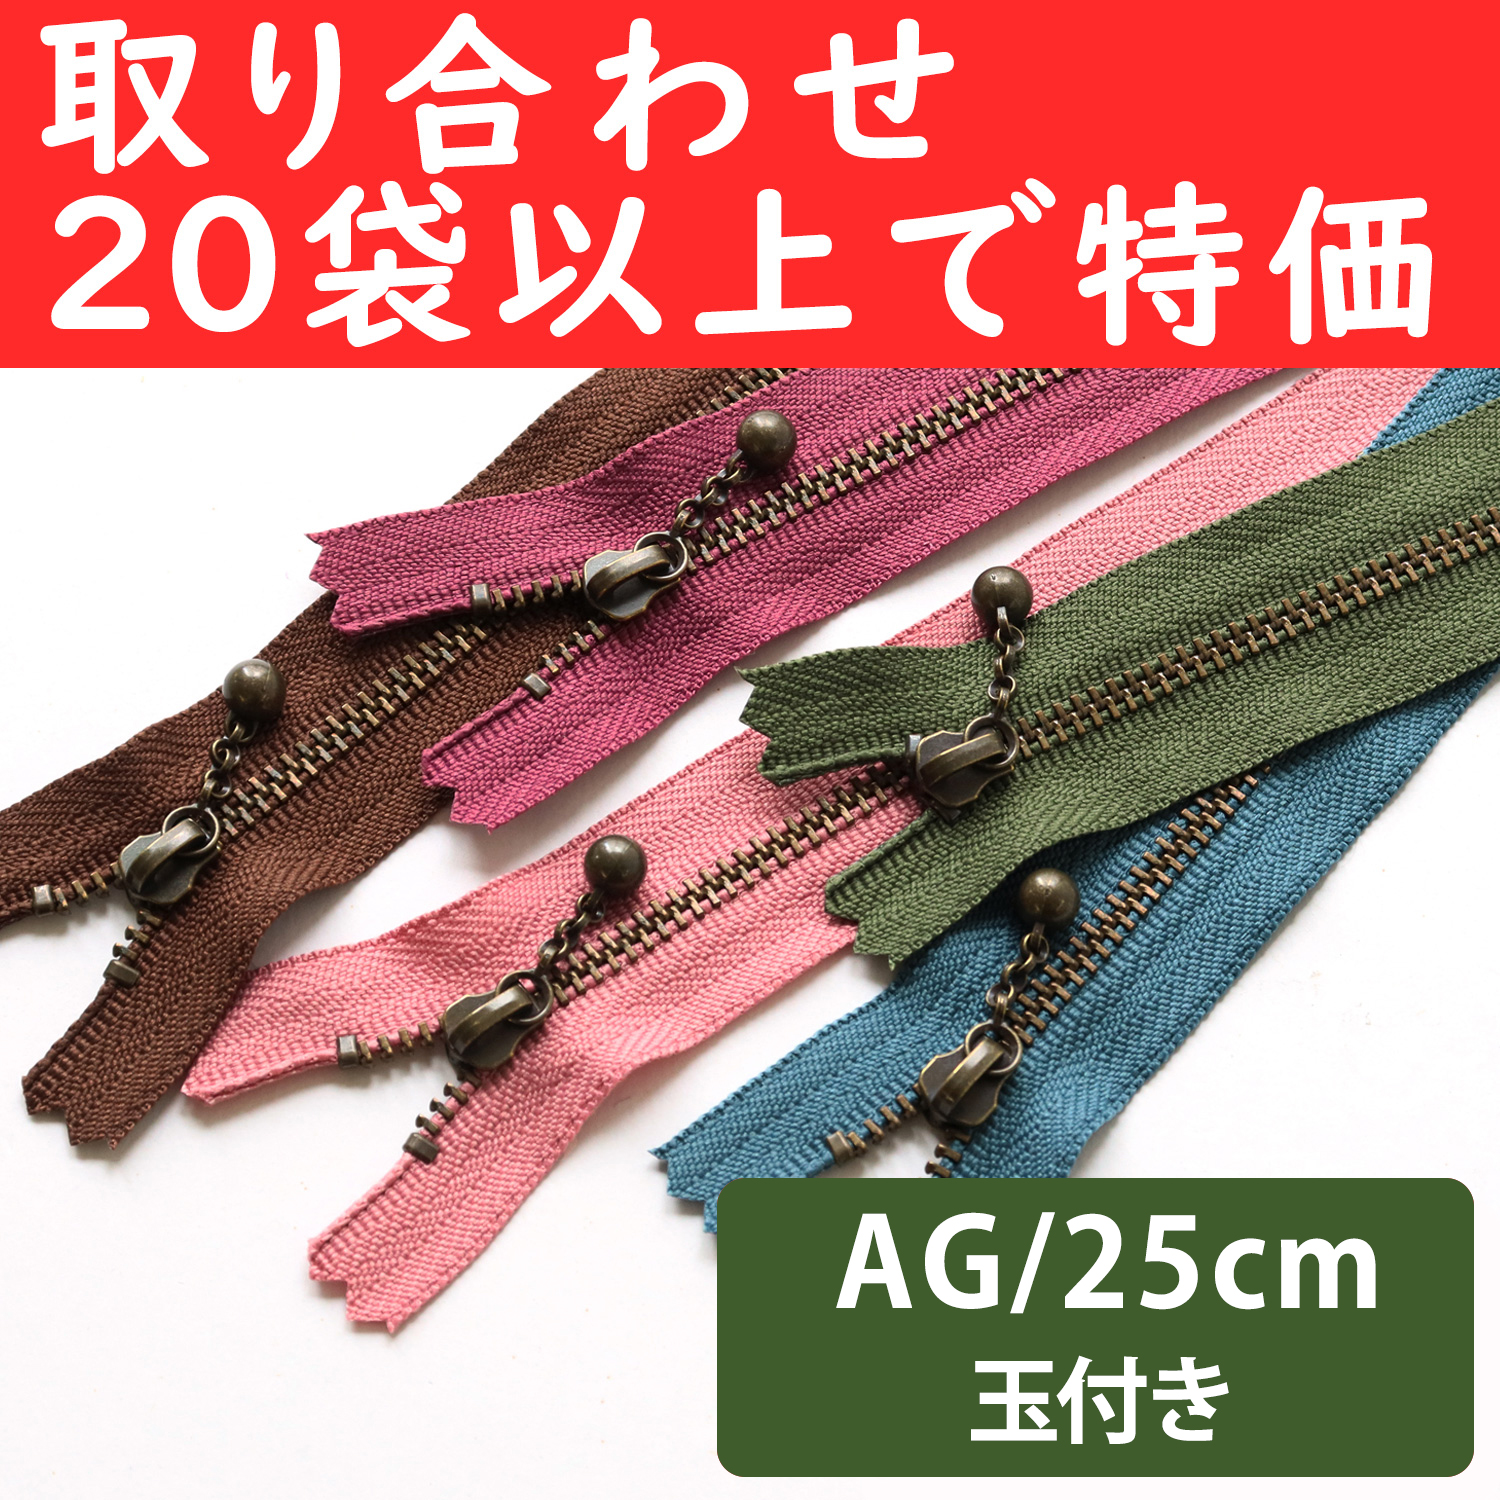 3GKB25-OVER200 Special)Ball Pull Zippers  AG 25cm ", orders with 20 bags or more (bag)